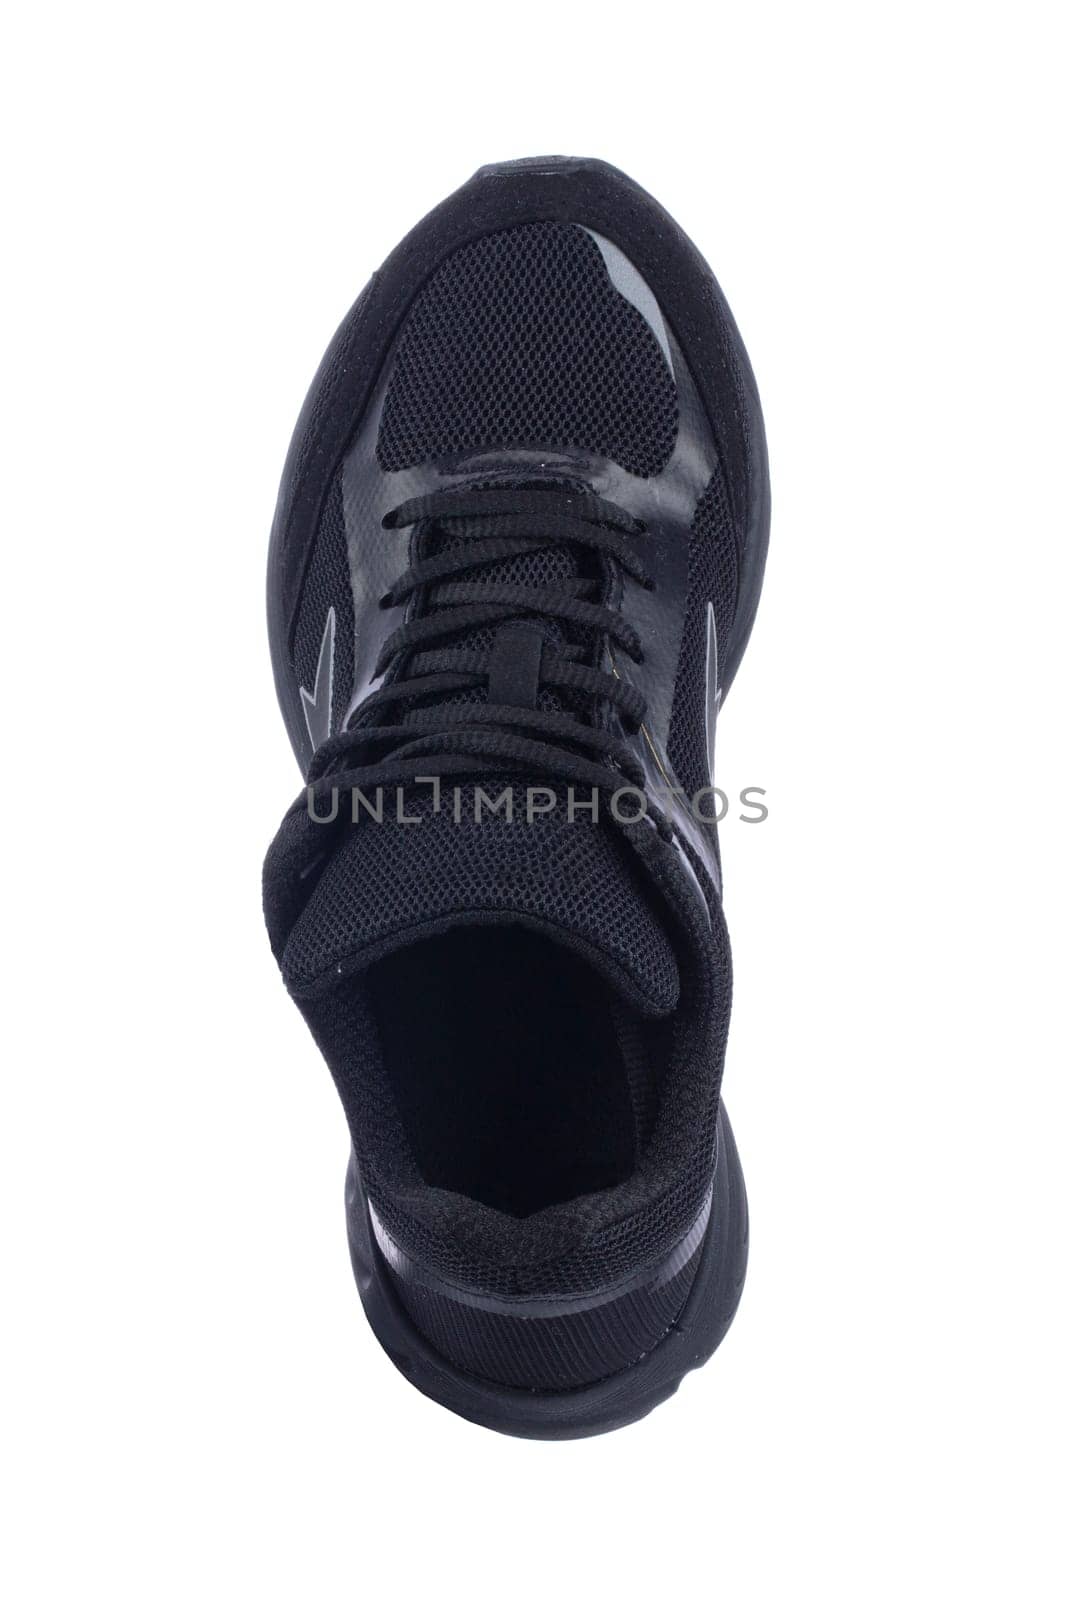 Sneaker one made of black fabric with lacing on a white background. by Sviatlana